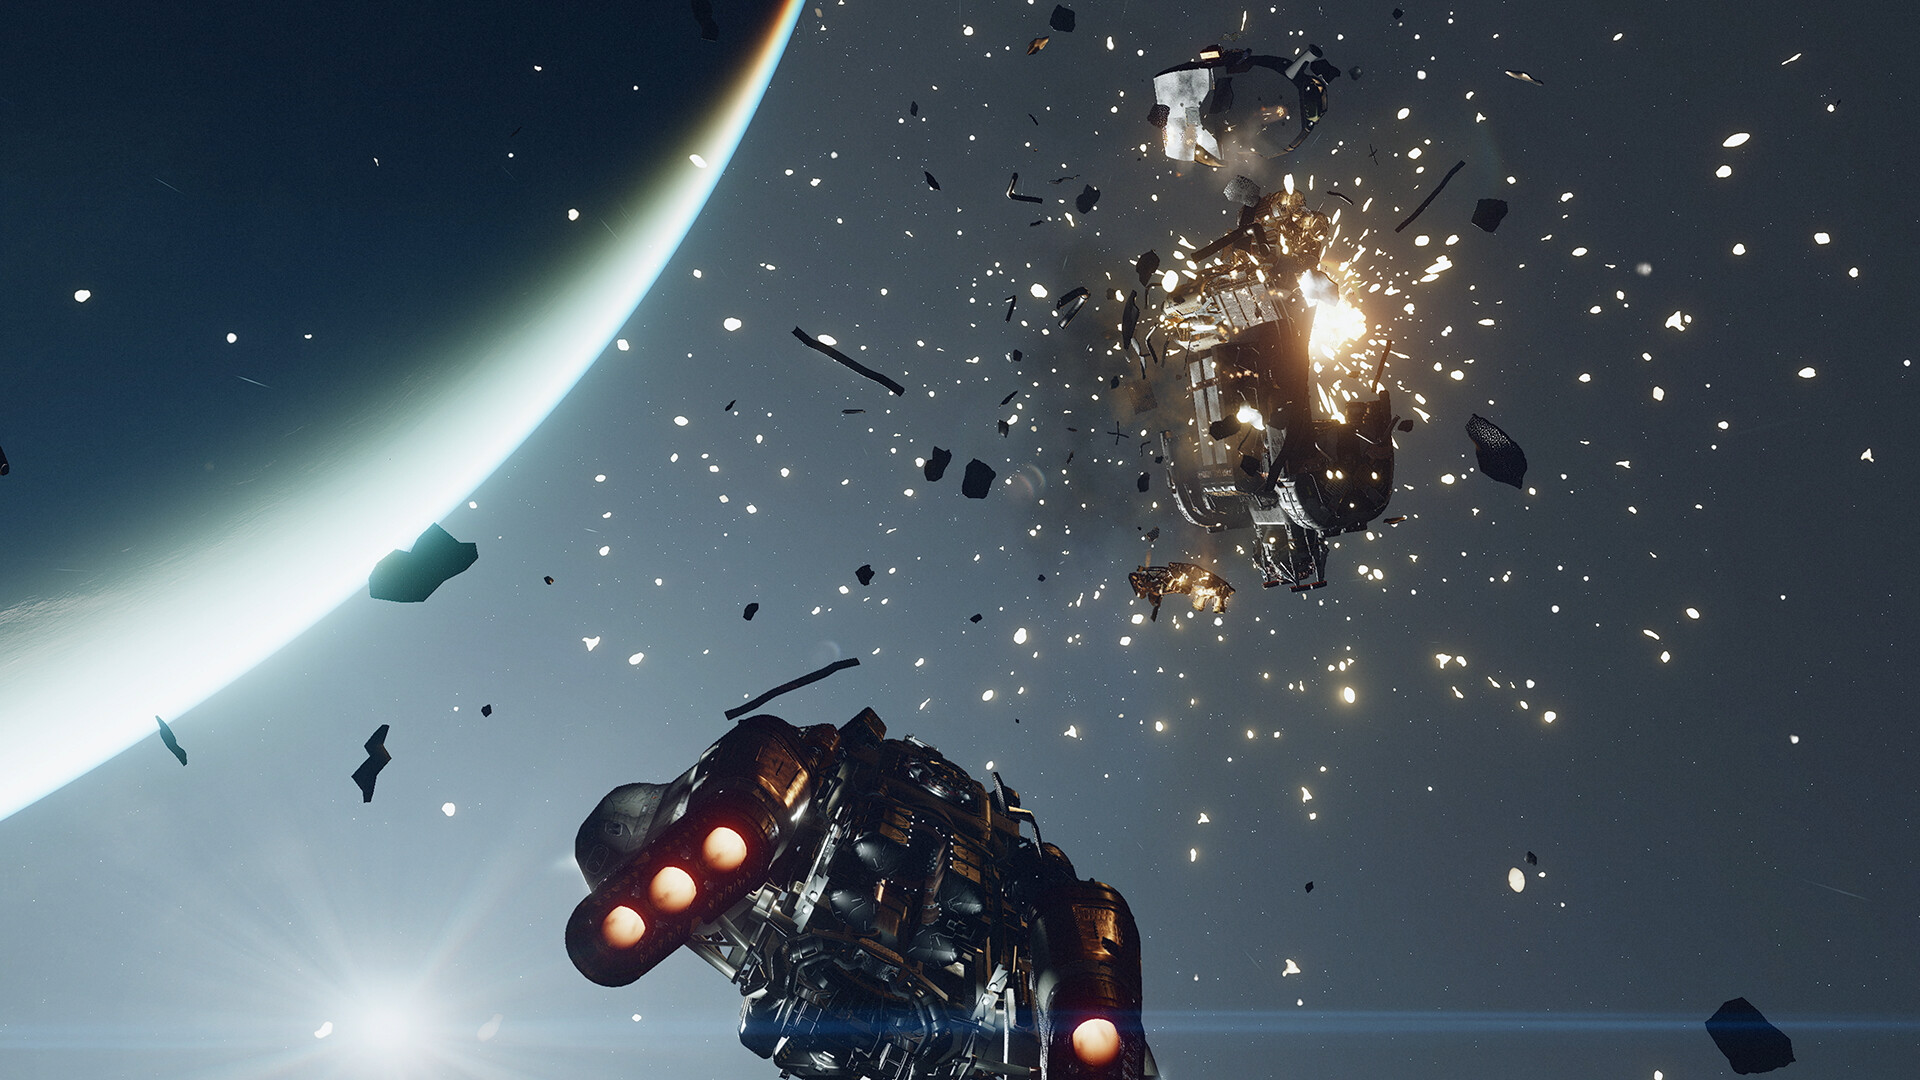 How to get dead bodies out of ships in Starfield - Dot Esports